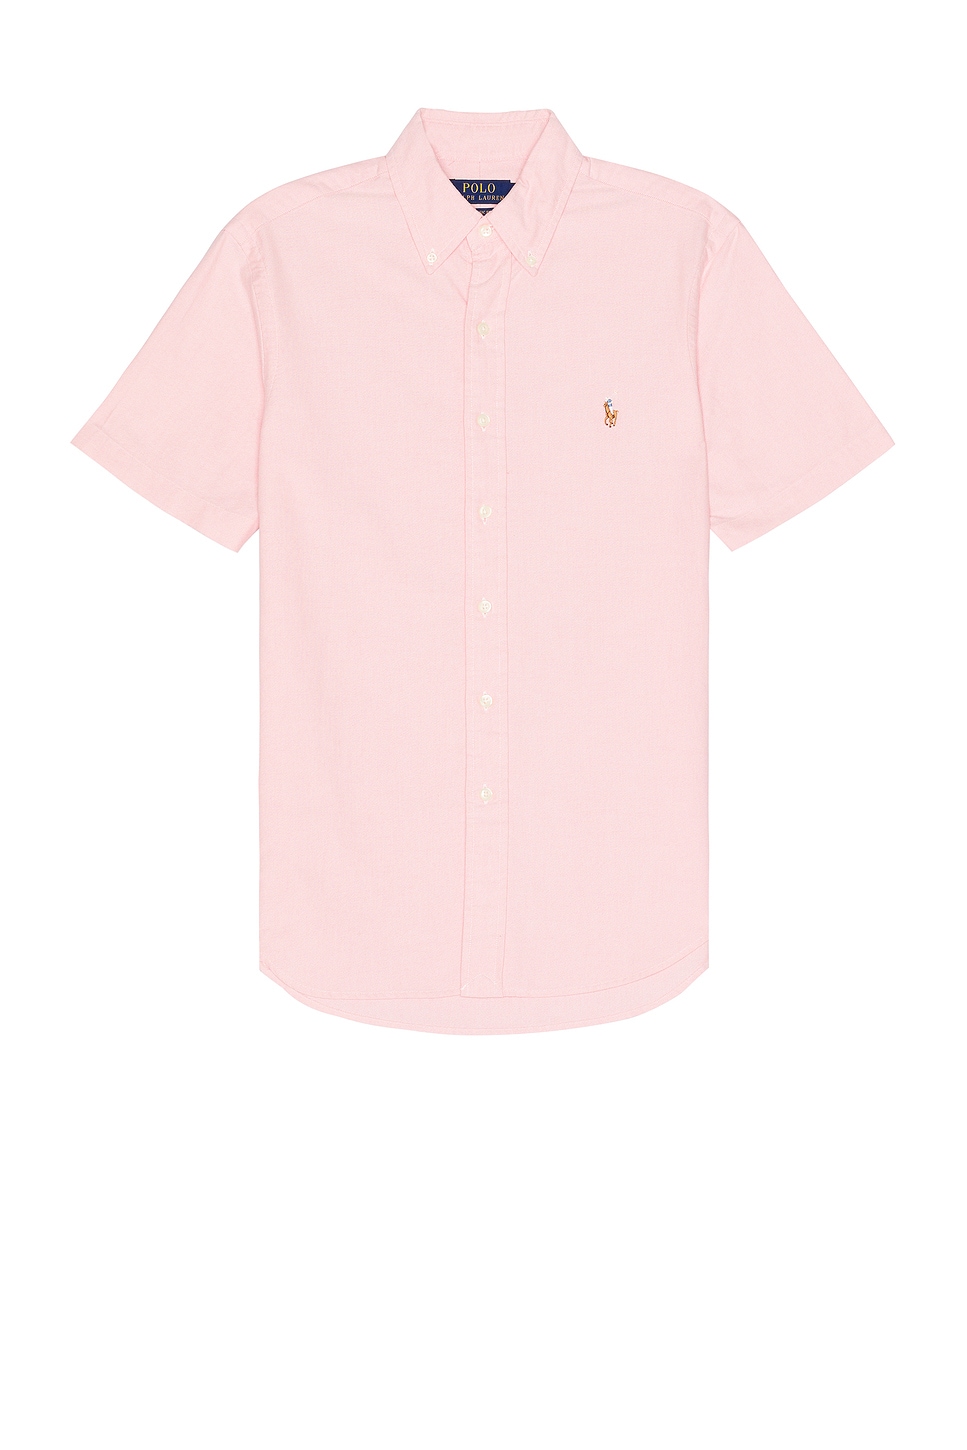 Image 1 of Polo Ralph Lauren Oxford Short Sleeve Shirt in Pink